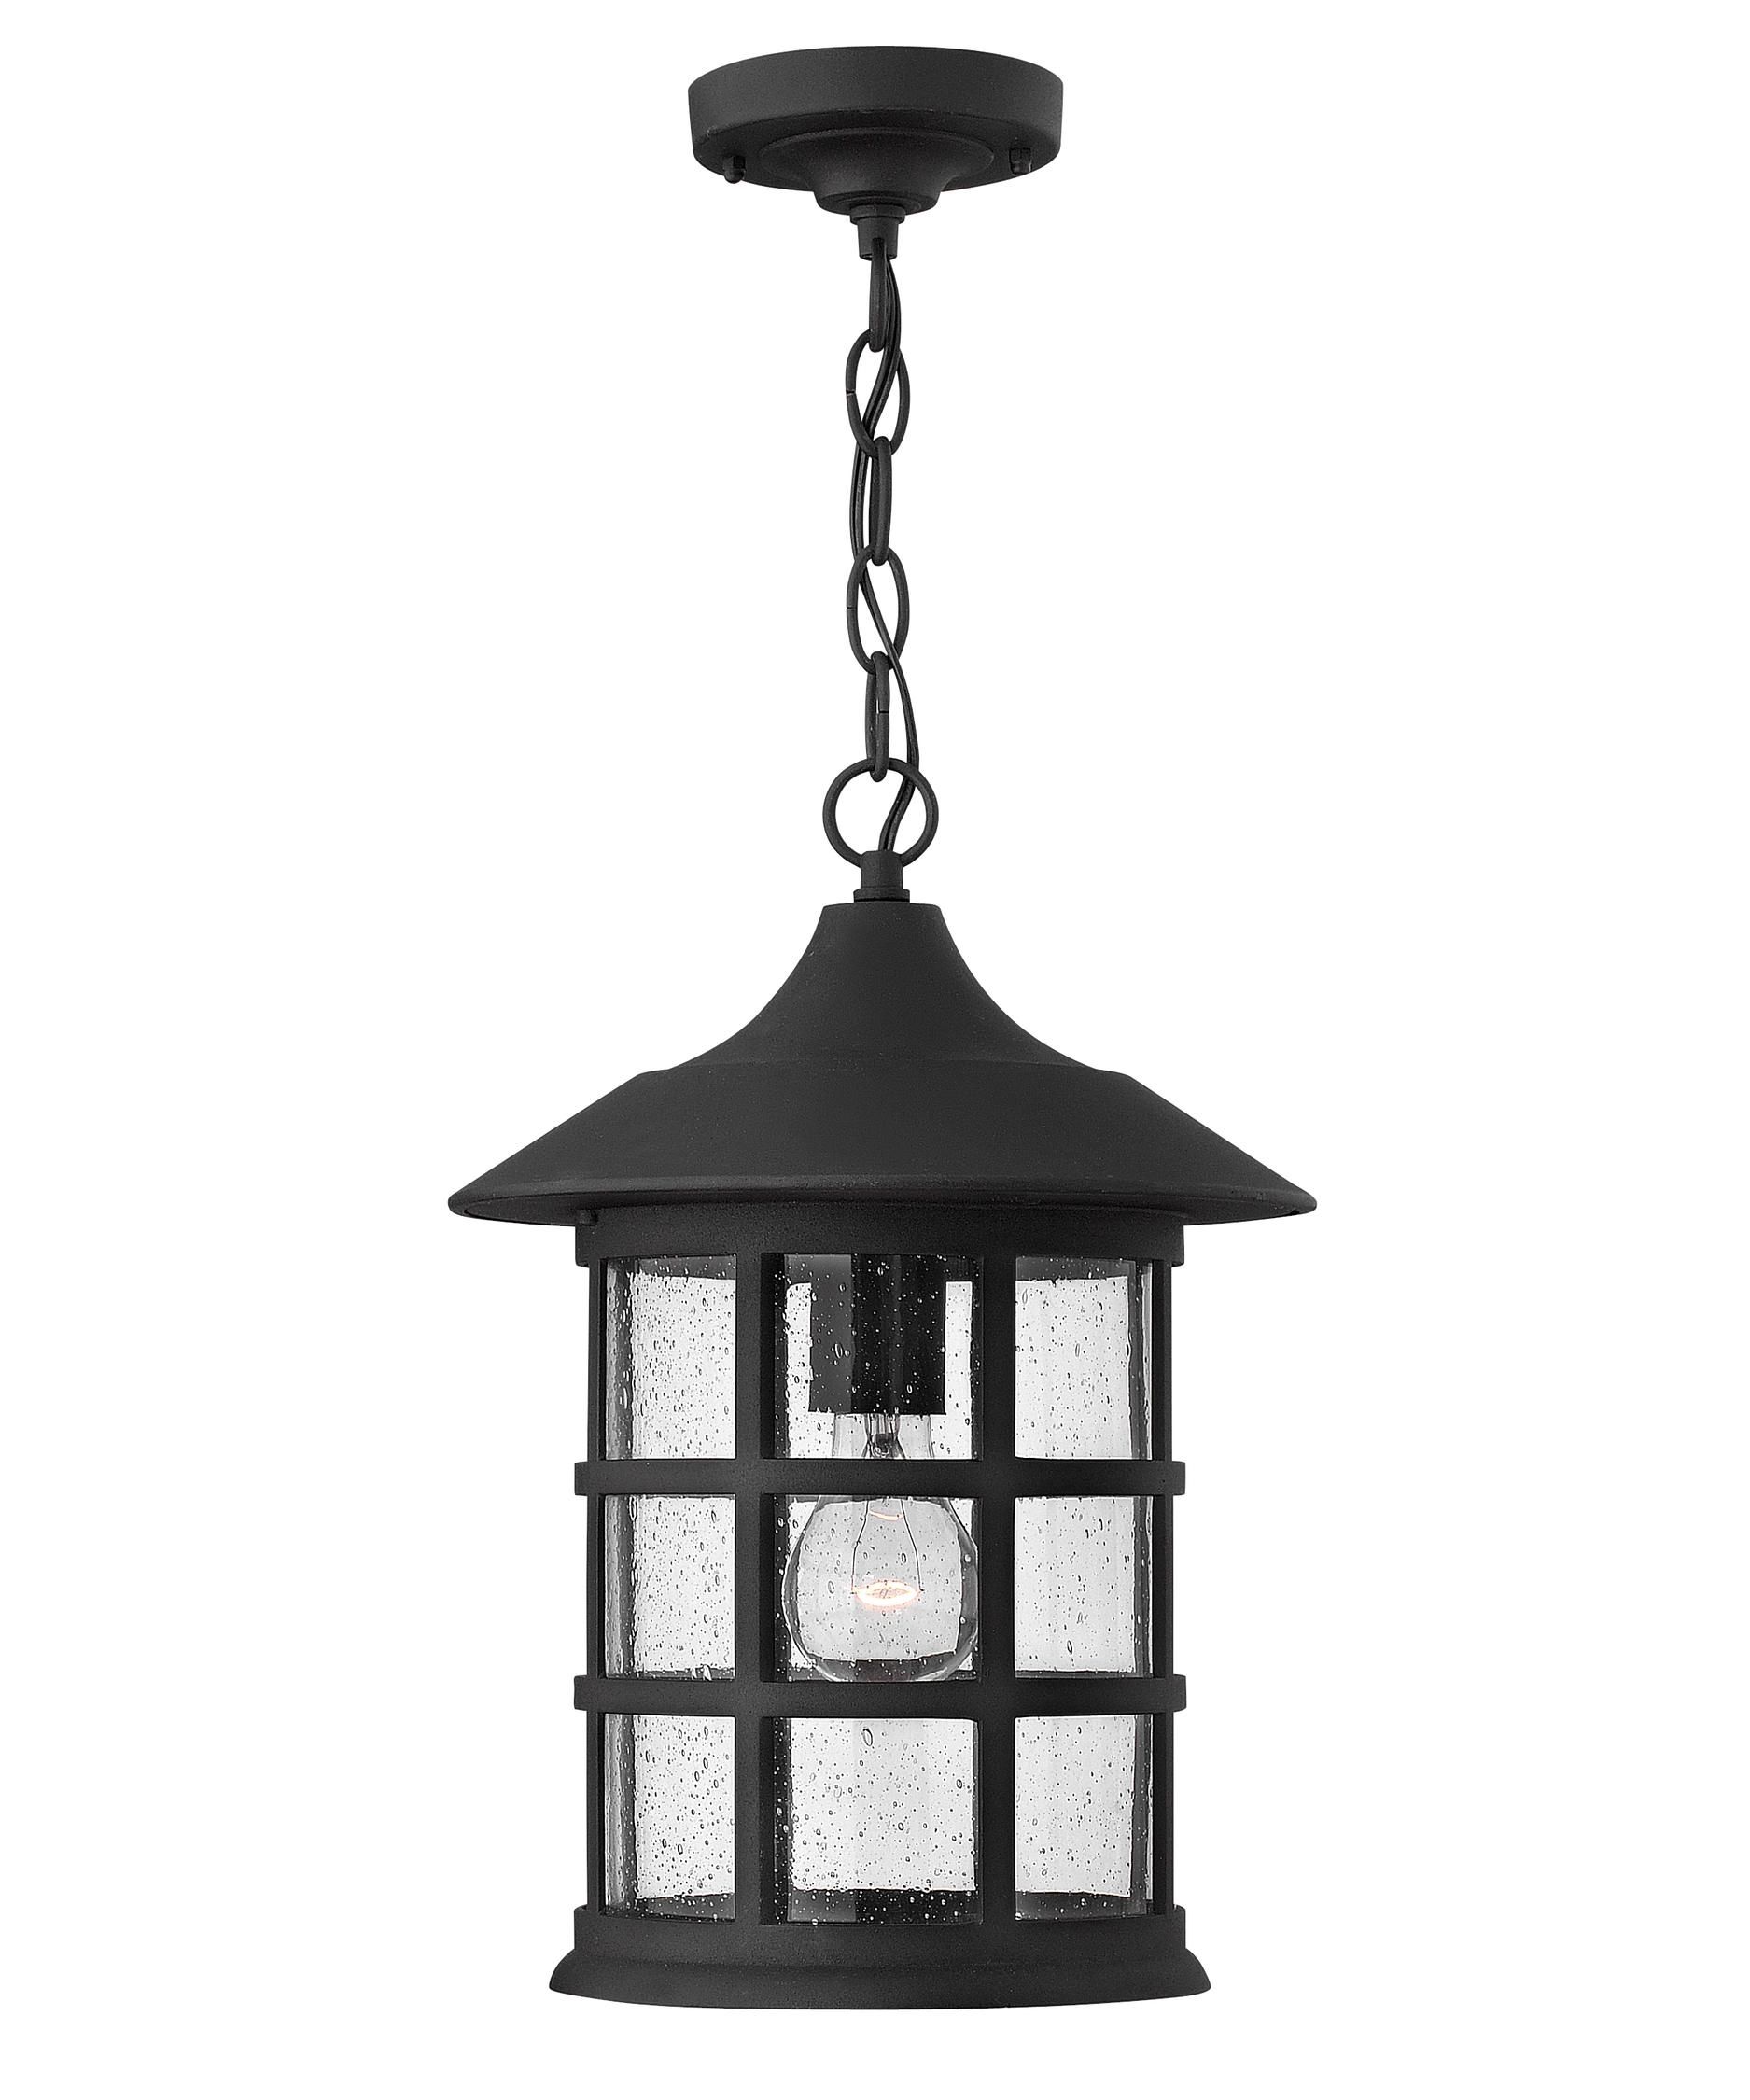 Hinkley Lighting 1802 Freeport 10 Inch Wide 1 Light Outdoor Hanging Within White Outdoor Hanging Lanterns (View 5 of 15)